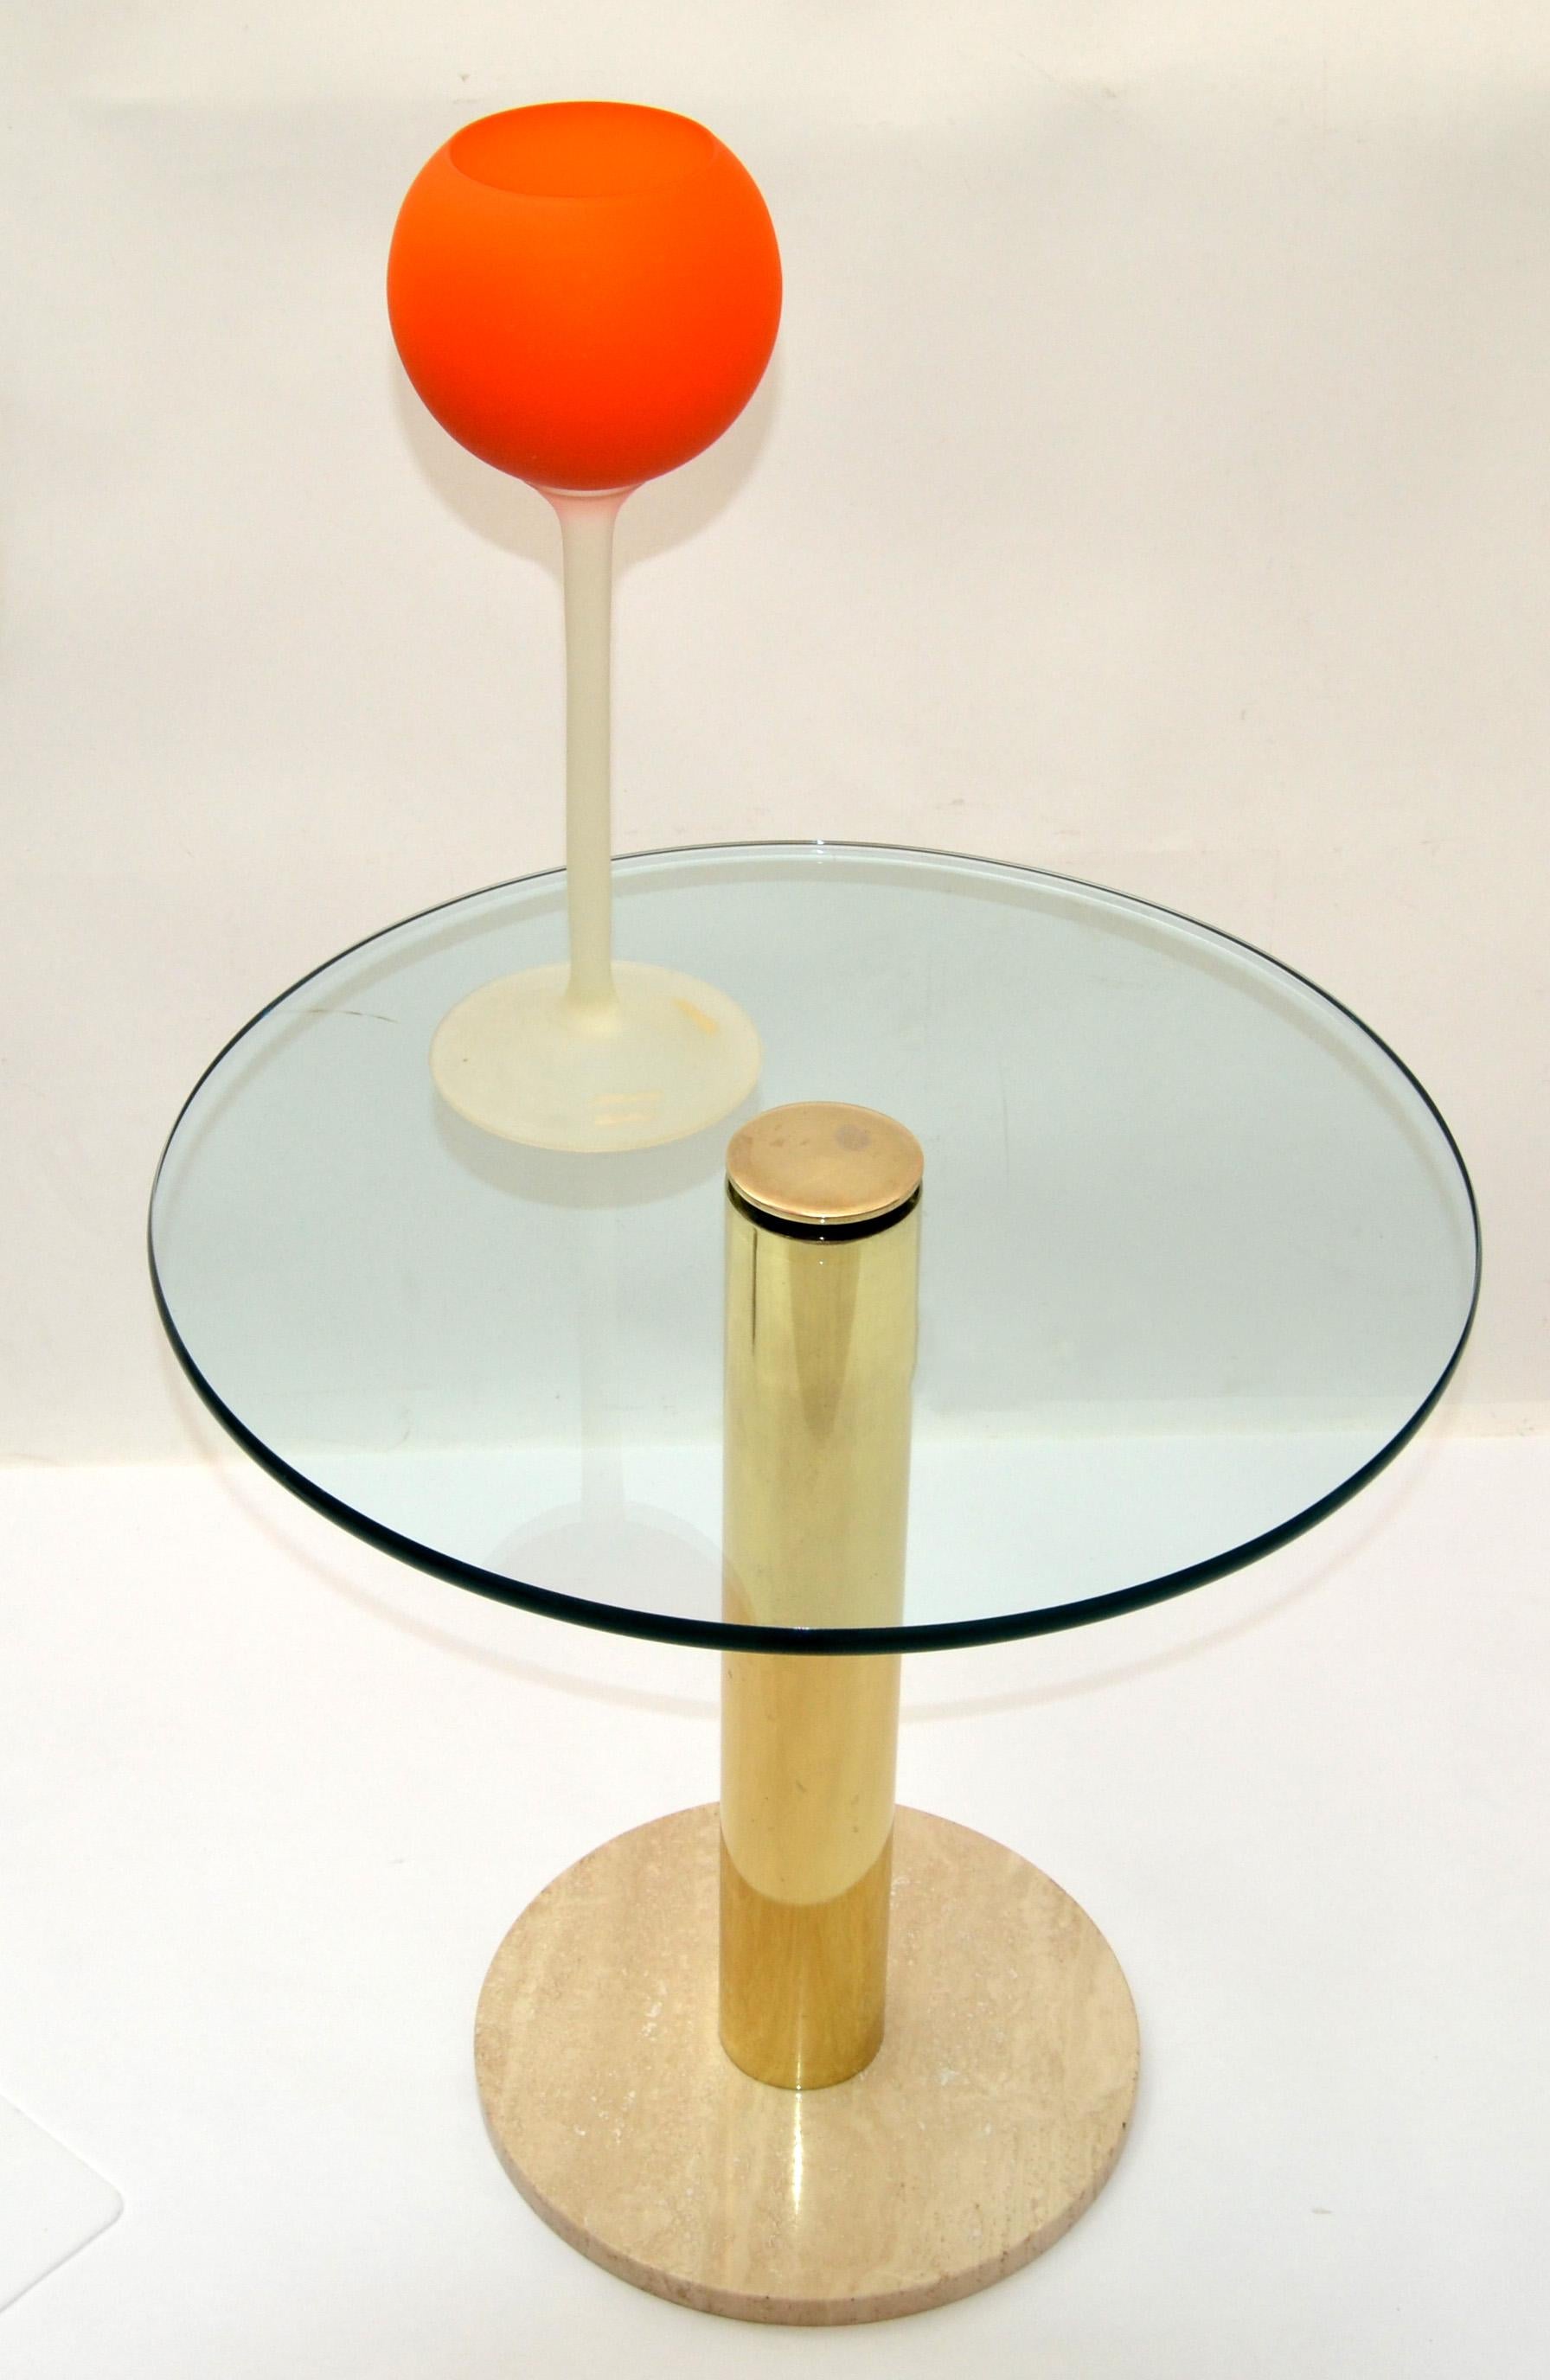 Moretti for Rosenthal Netter Satin Red & Frosted Glass Vase Wine Glass Sculpture In Good Condition For Sale In Miami, FL